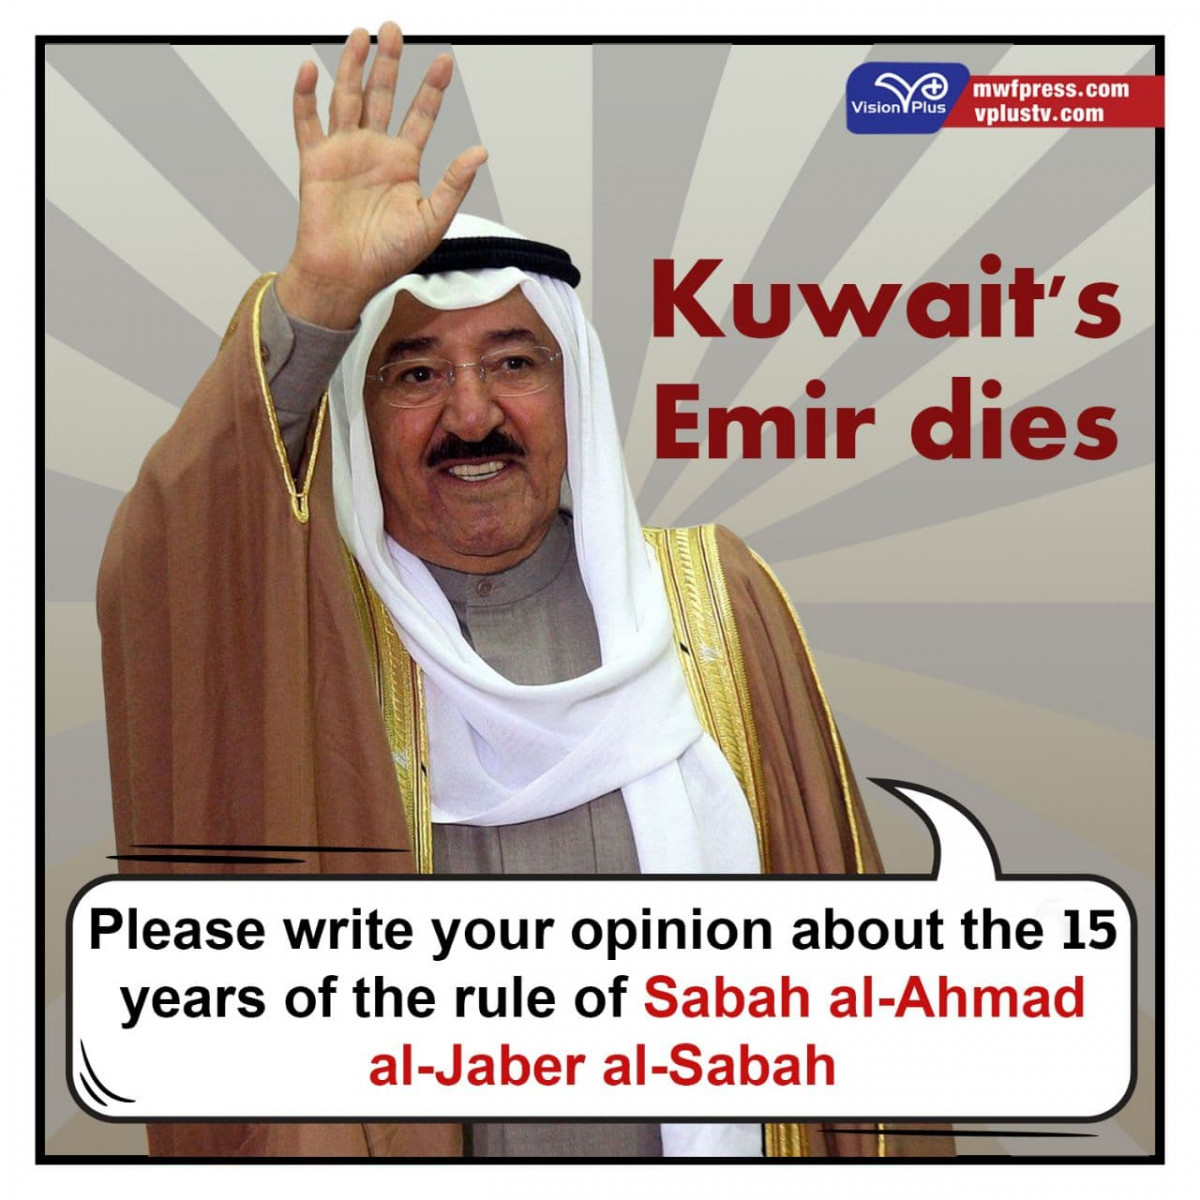 Kuwait's Emir dies  Please write your opinion about the 15 years of the rule of Sabah al-Ahmad al-Jaber al-Sabah